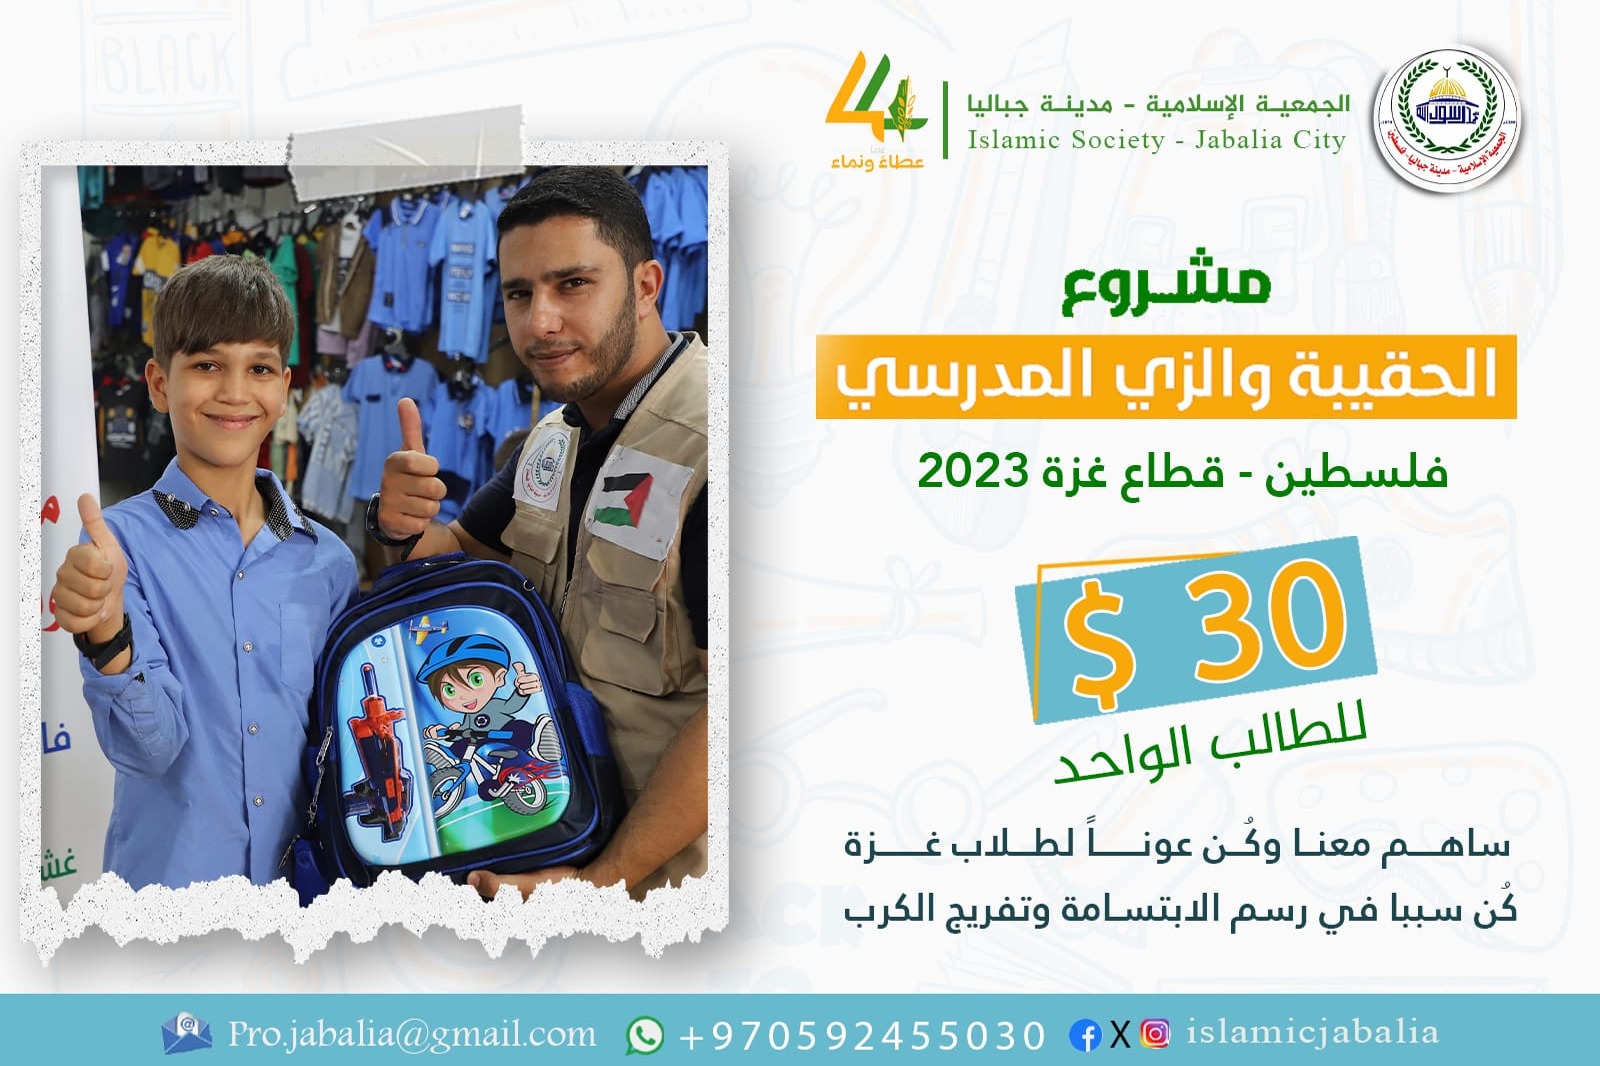 Distribution of school bags to poor and affected students in the Gaza Strip